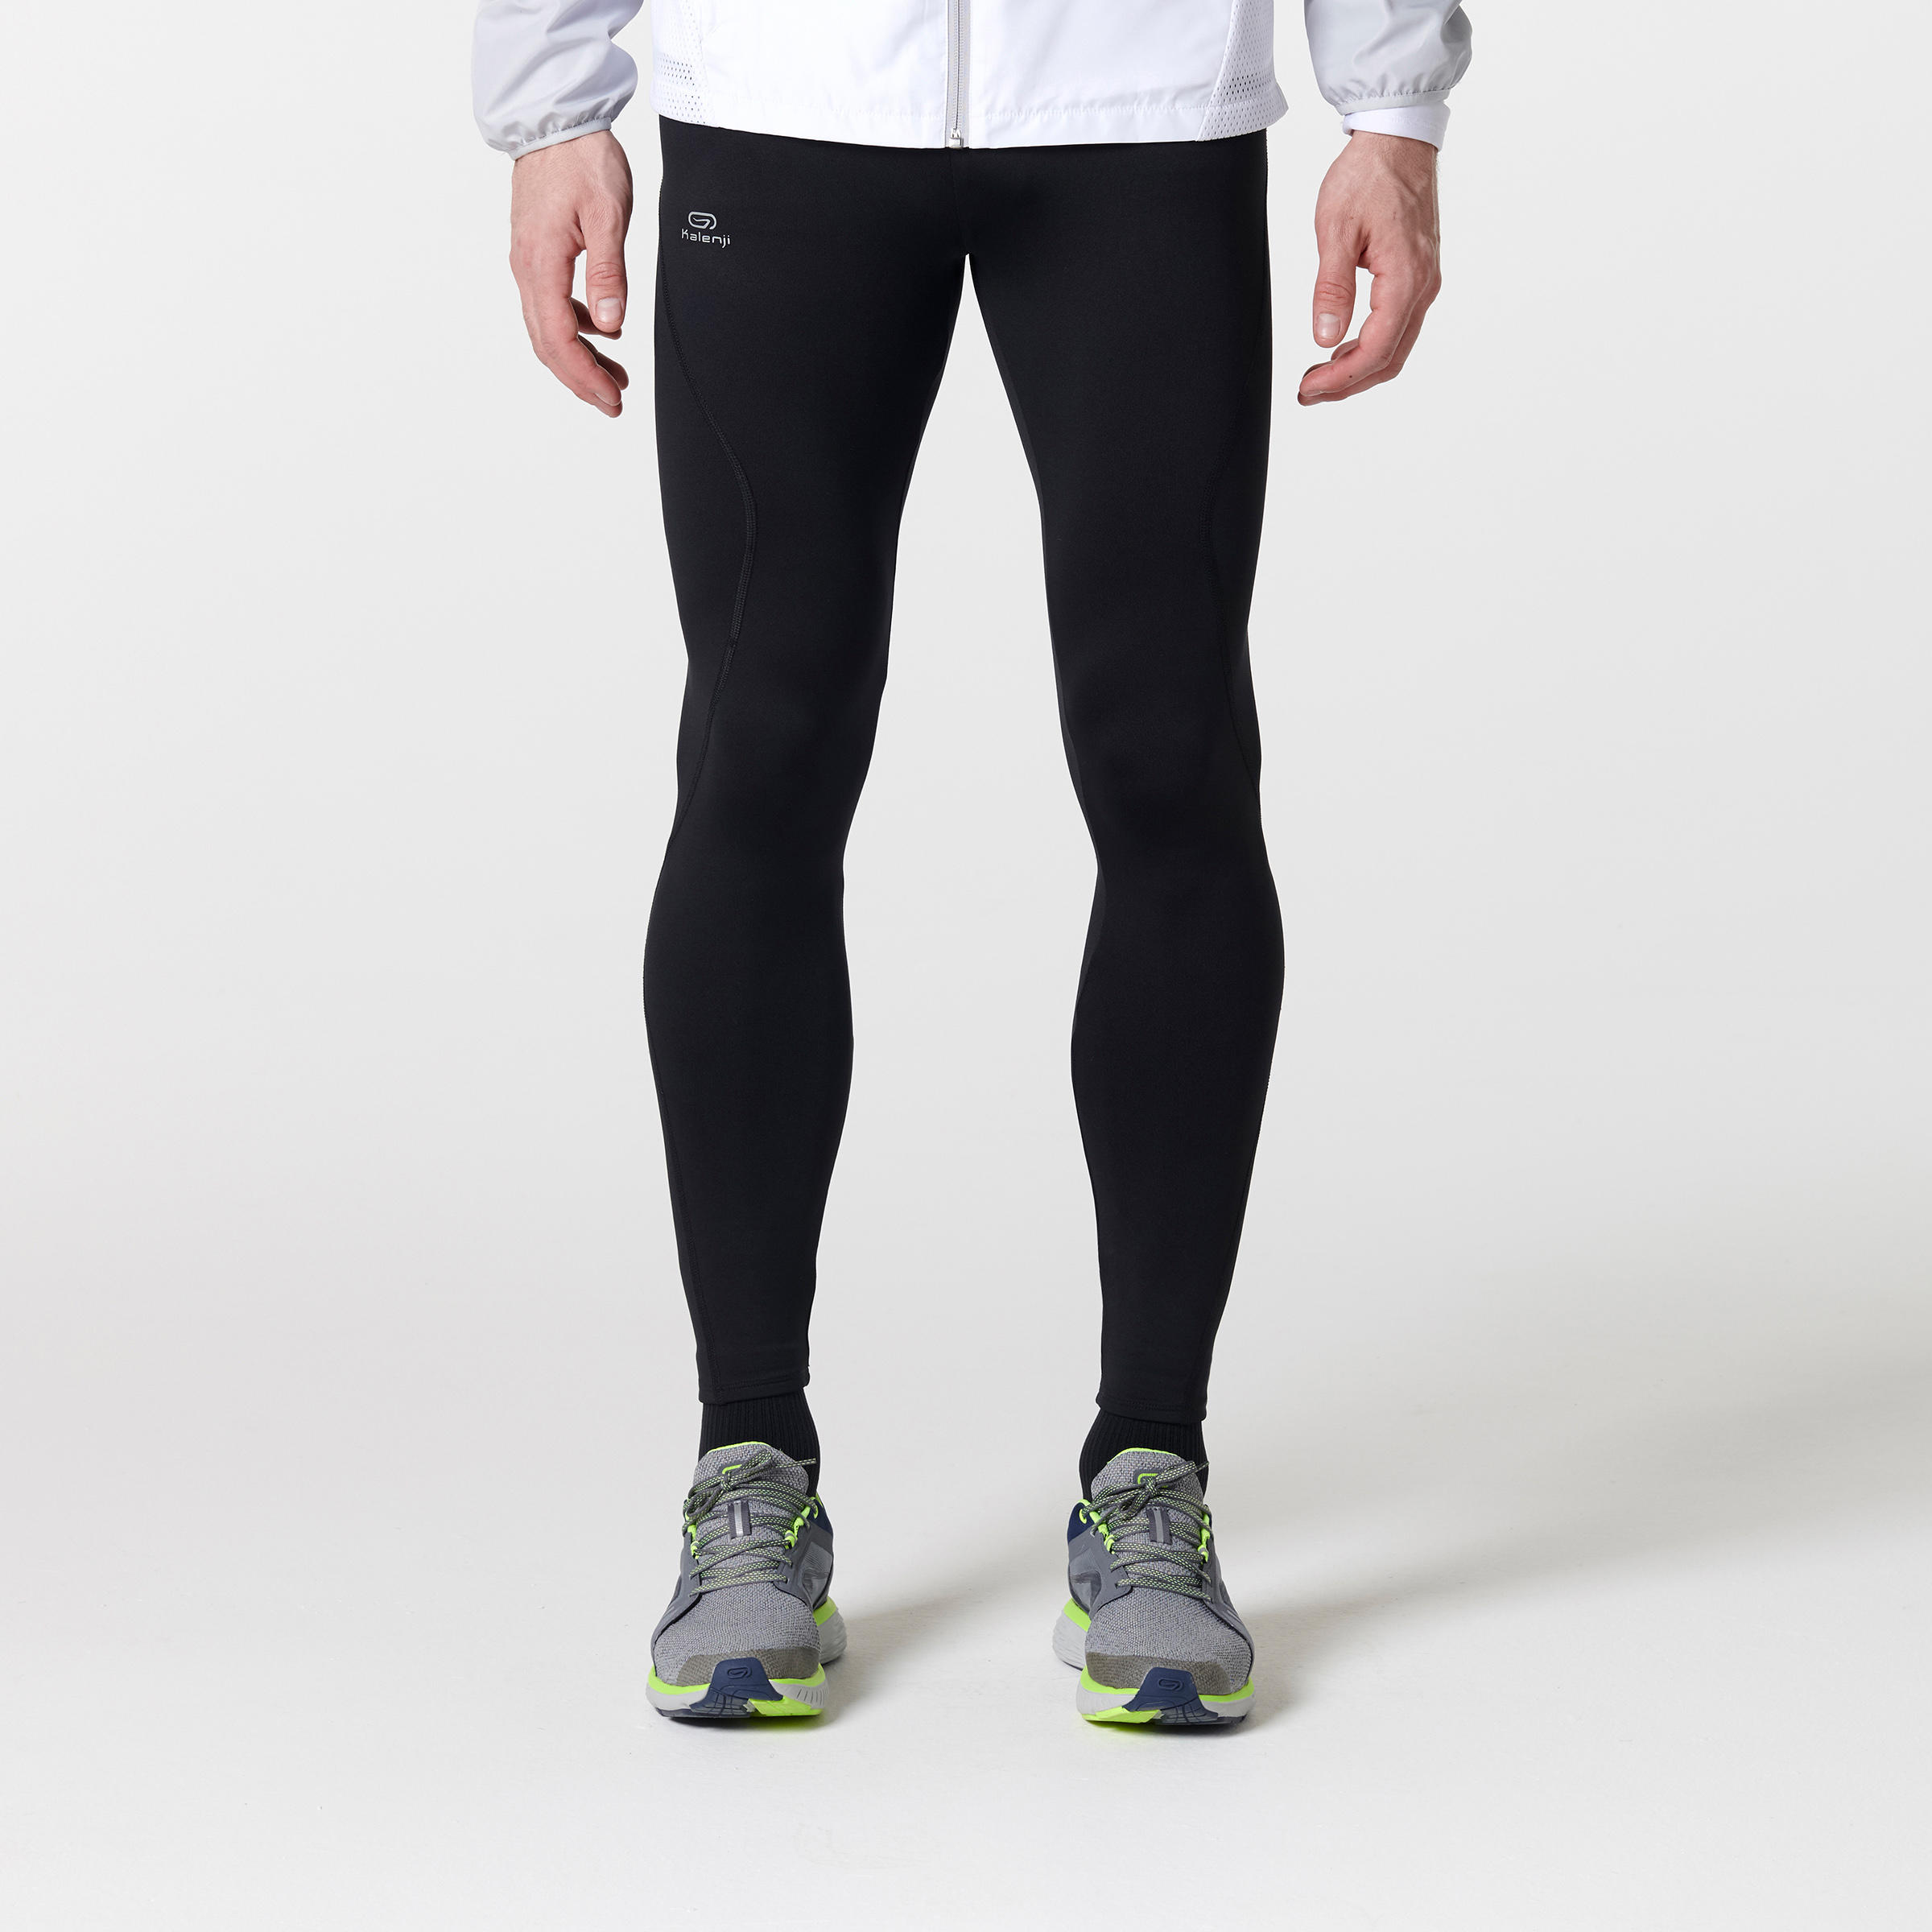 Best Mens Cold Weather Running Tights of 2023